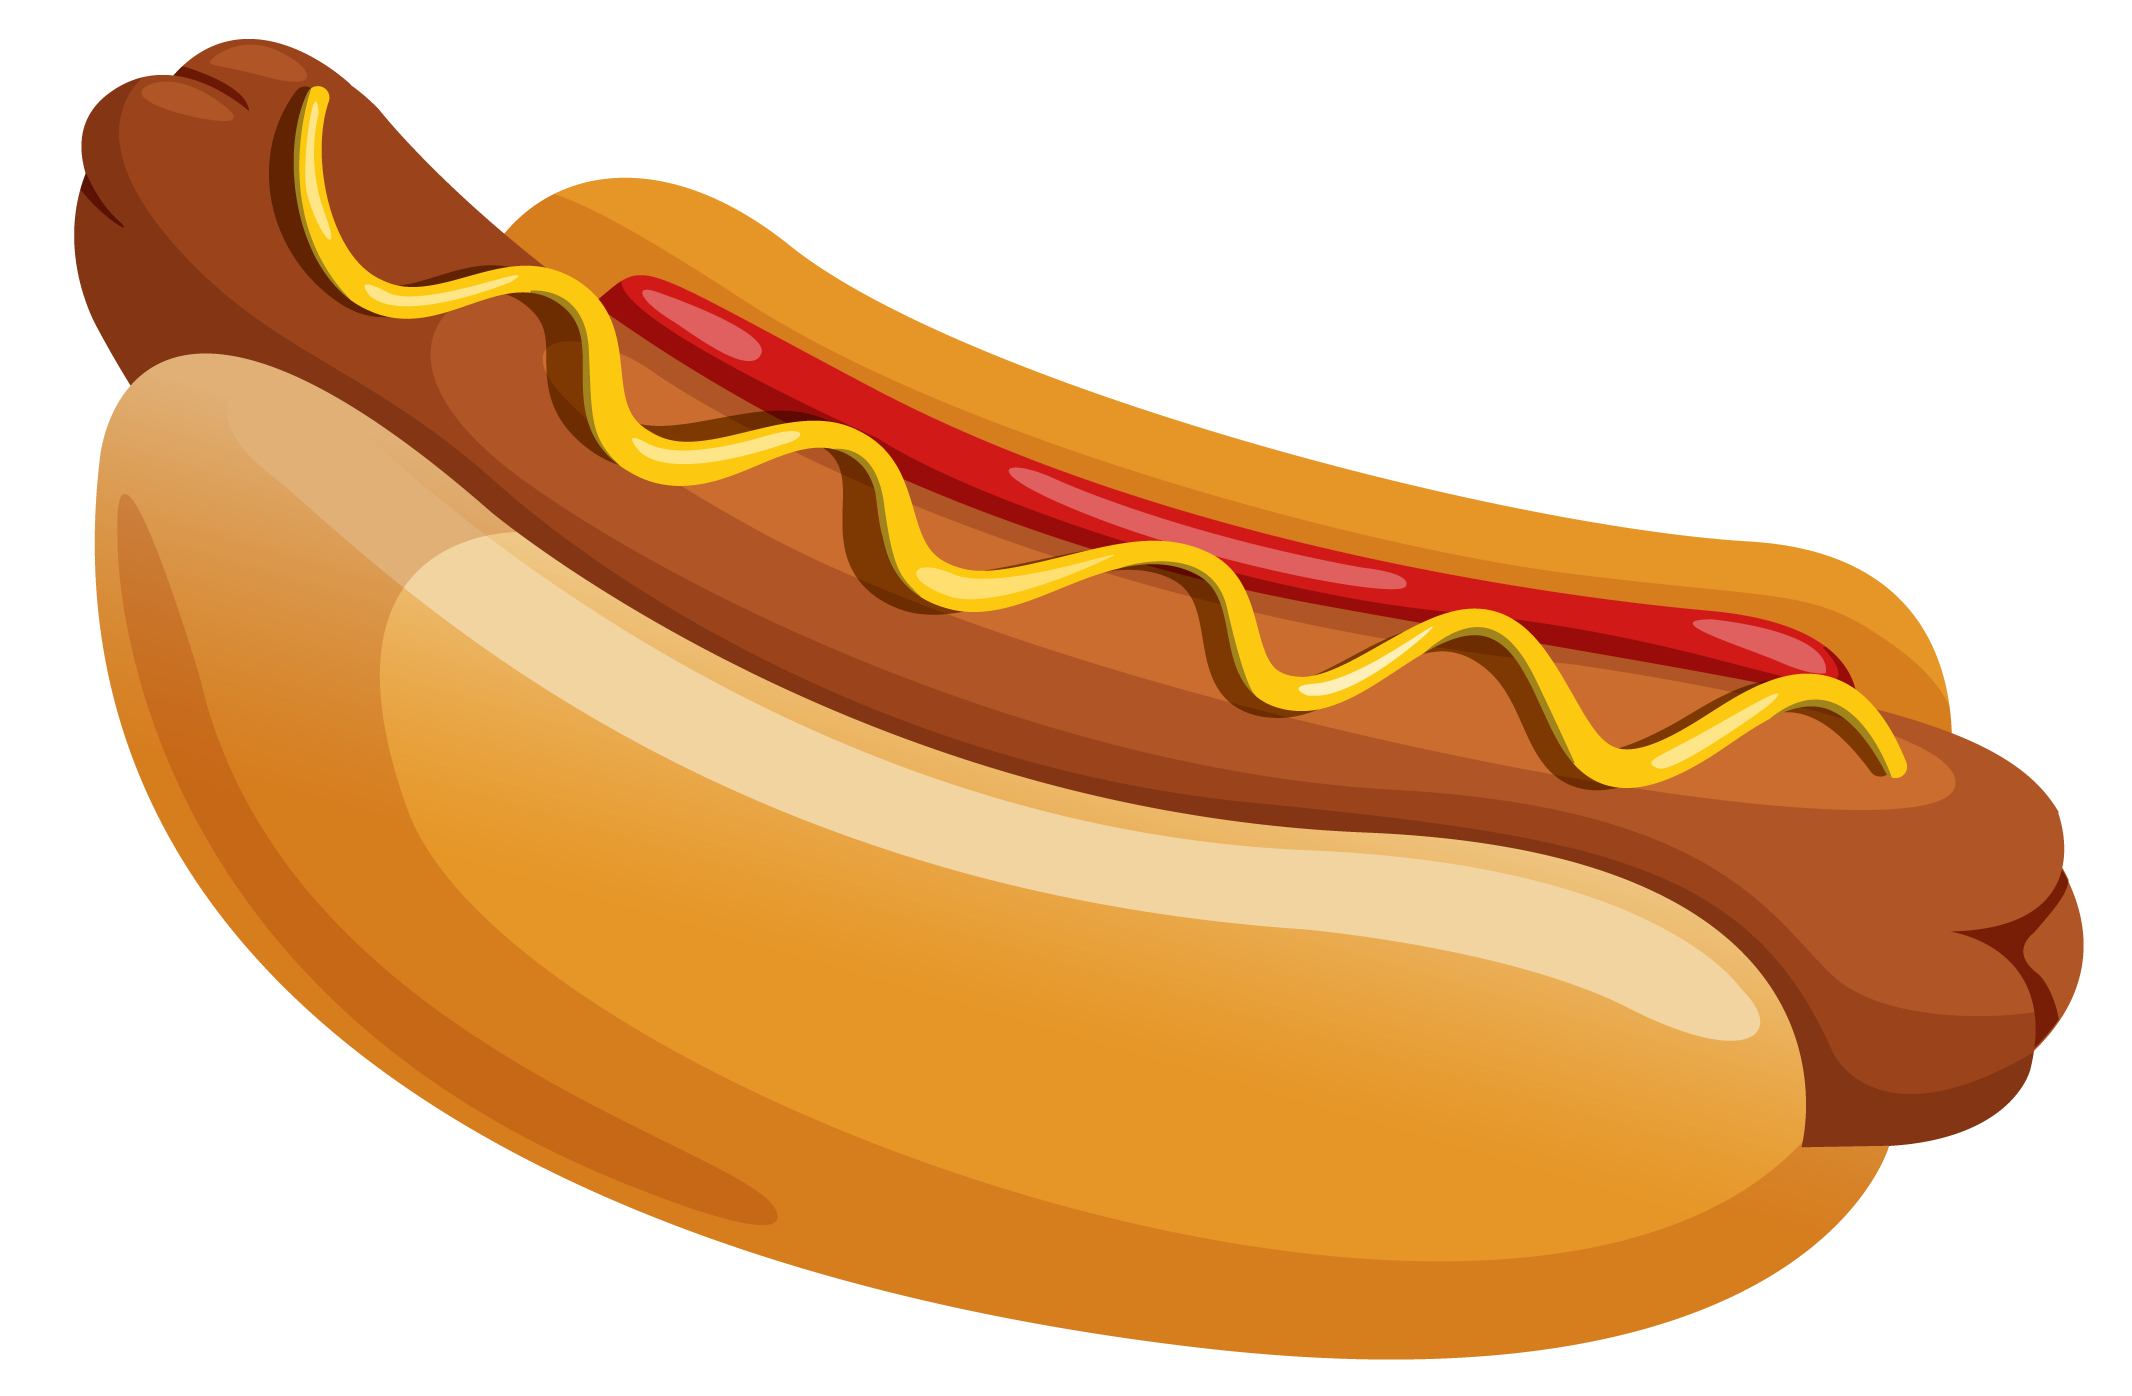 Hot Dog Clipart - Clipartion 